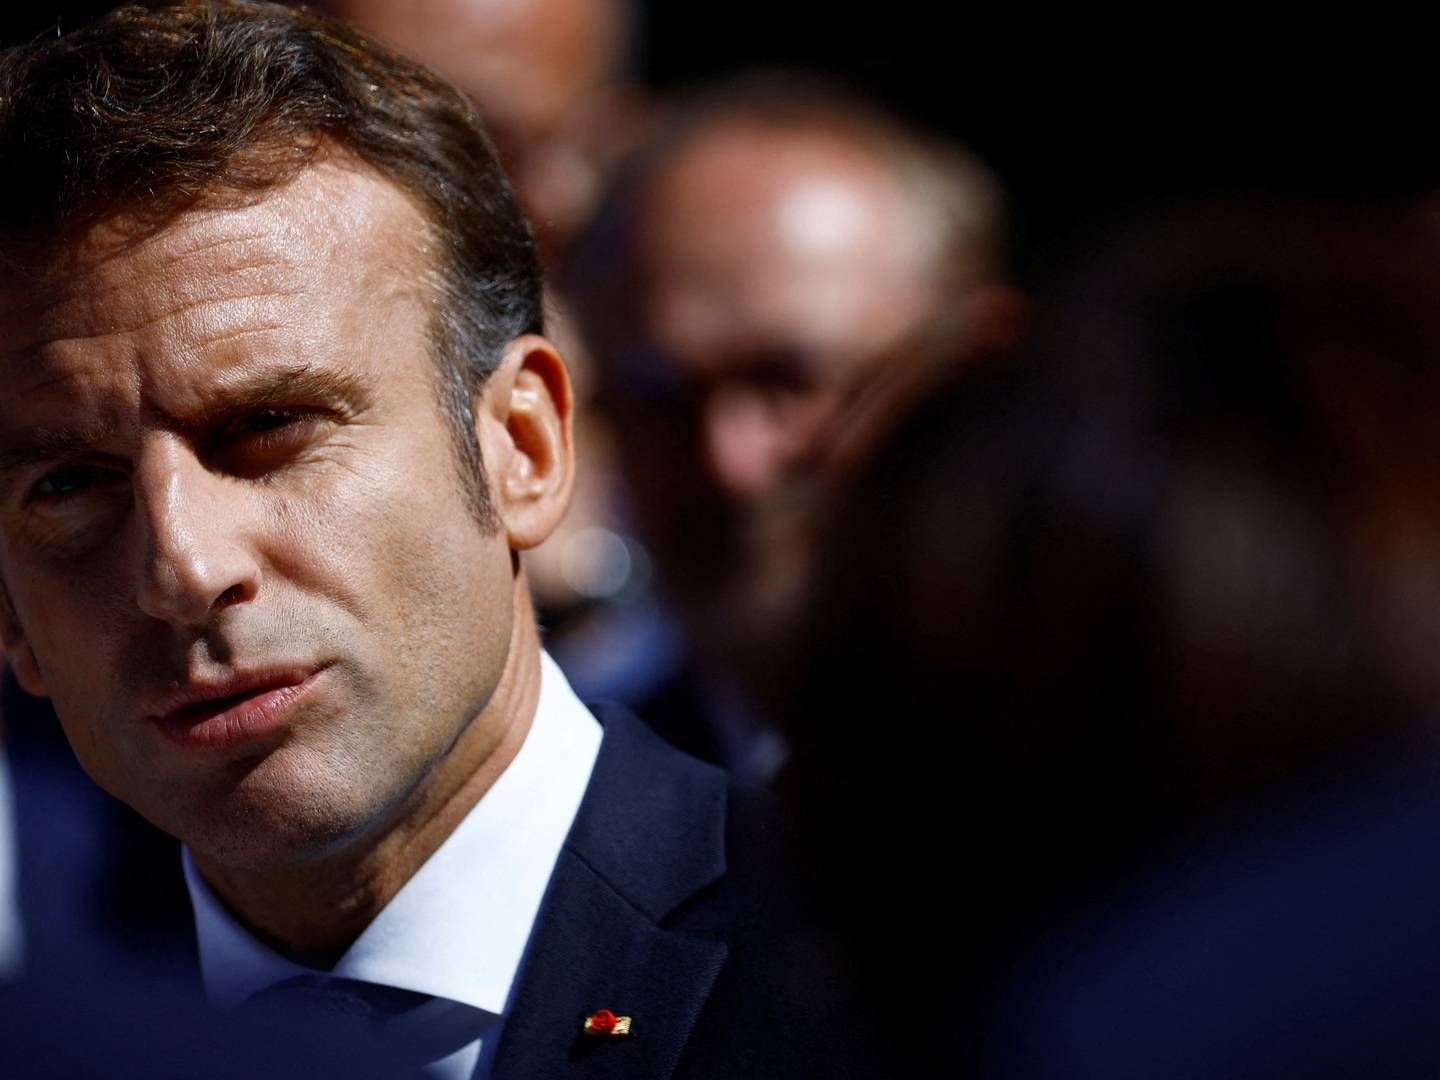 French President Emmanuel Macron sees no reason to revive plans for a new gas pipeline linking Spain and France. | Photo: Stephane Mahe/AFP / POOL